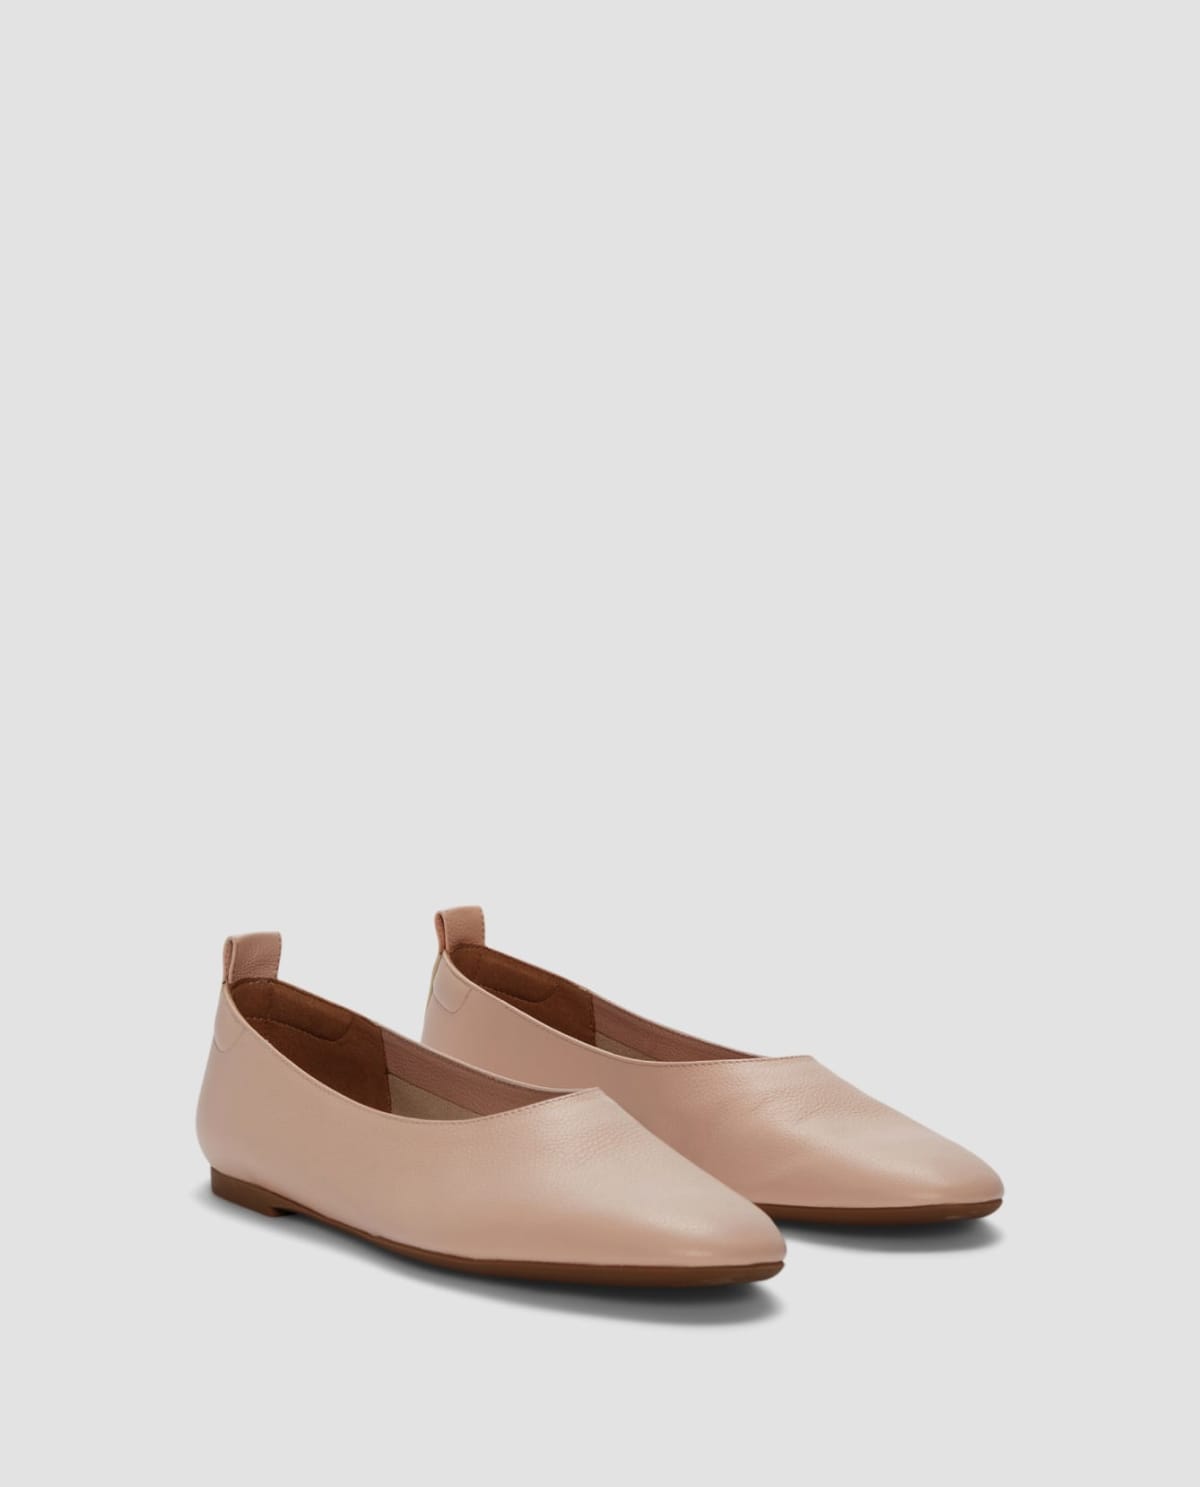 Women's Shoes - Sandals, Boots, Sneakers & Flats – Everlane